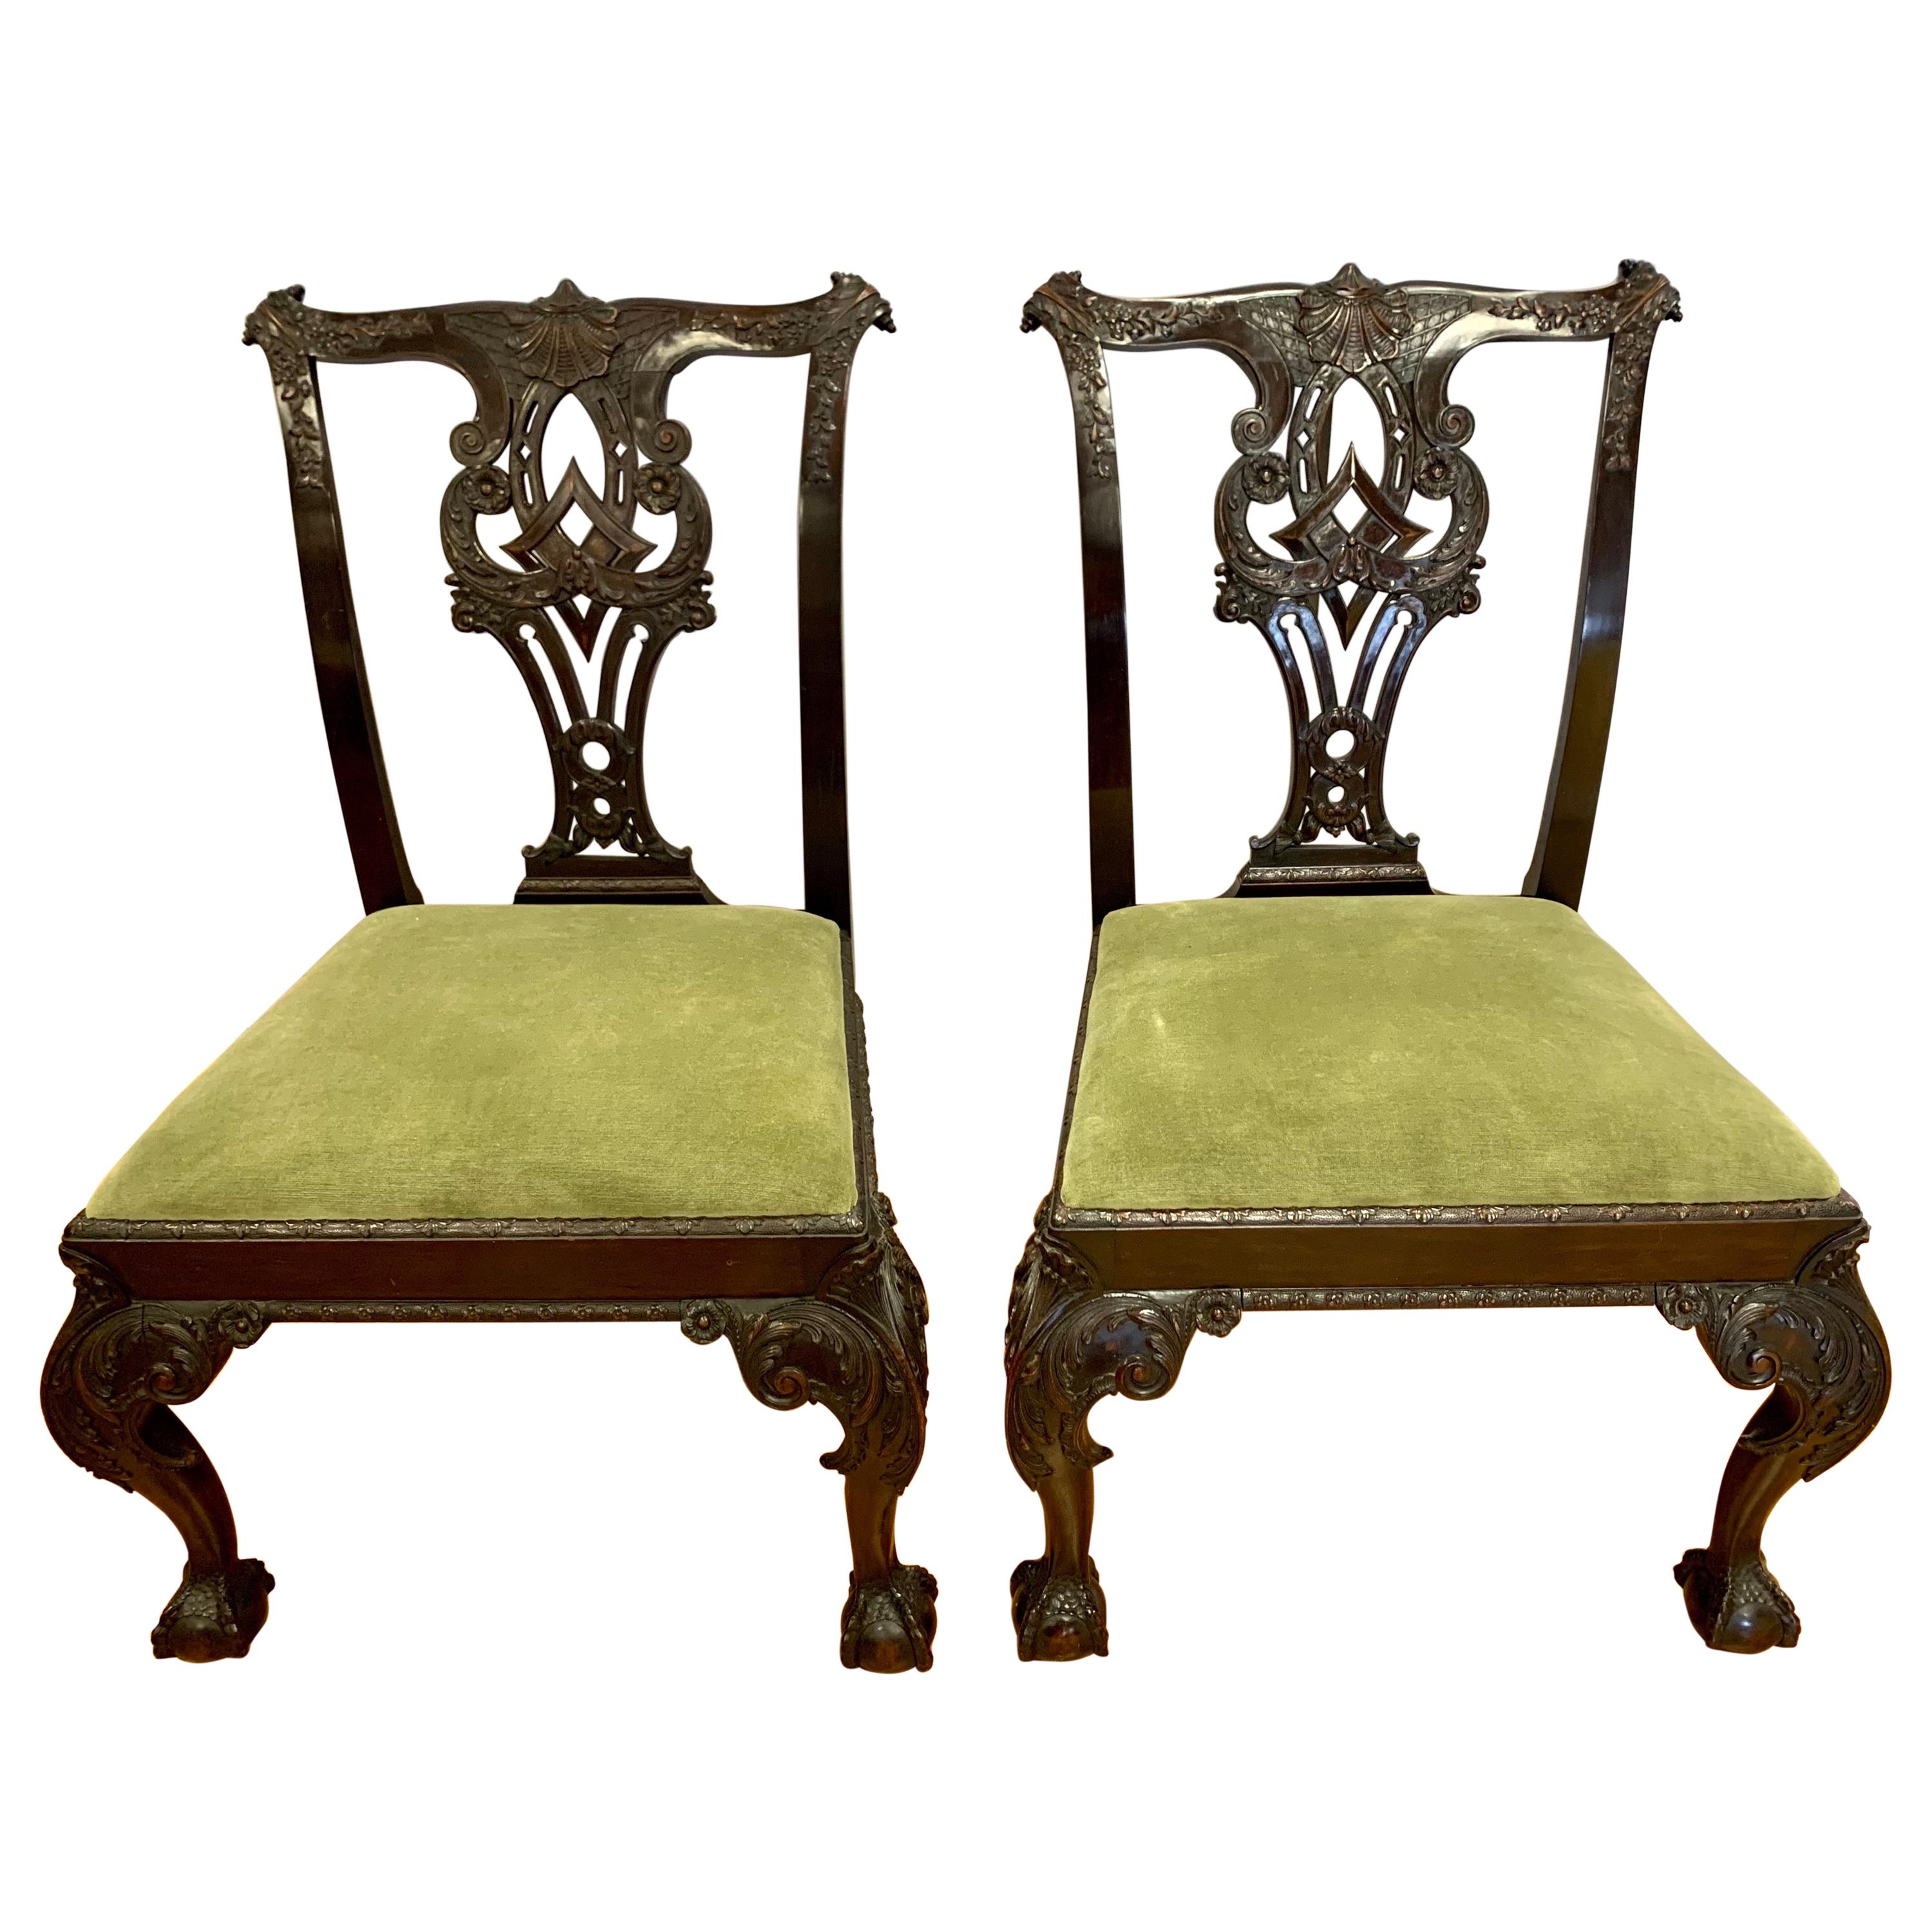 19th Century George III Ball and Claw Chippendale Chairs